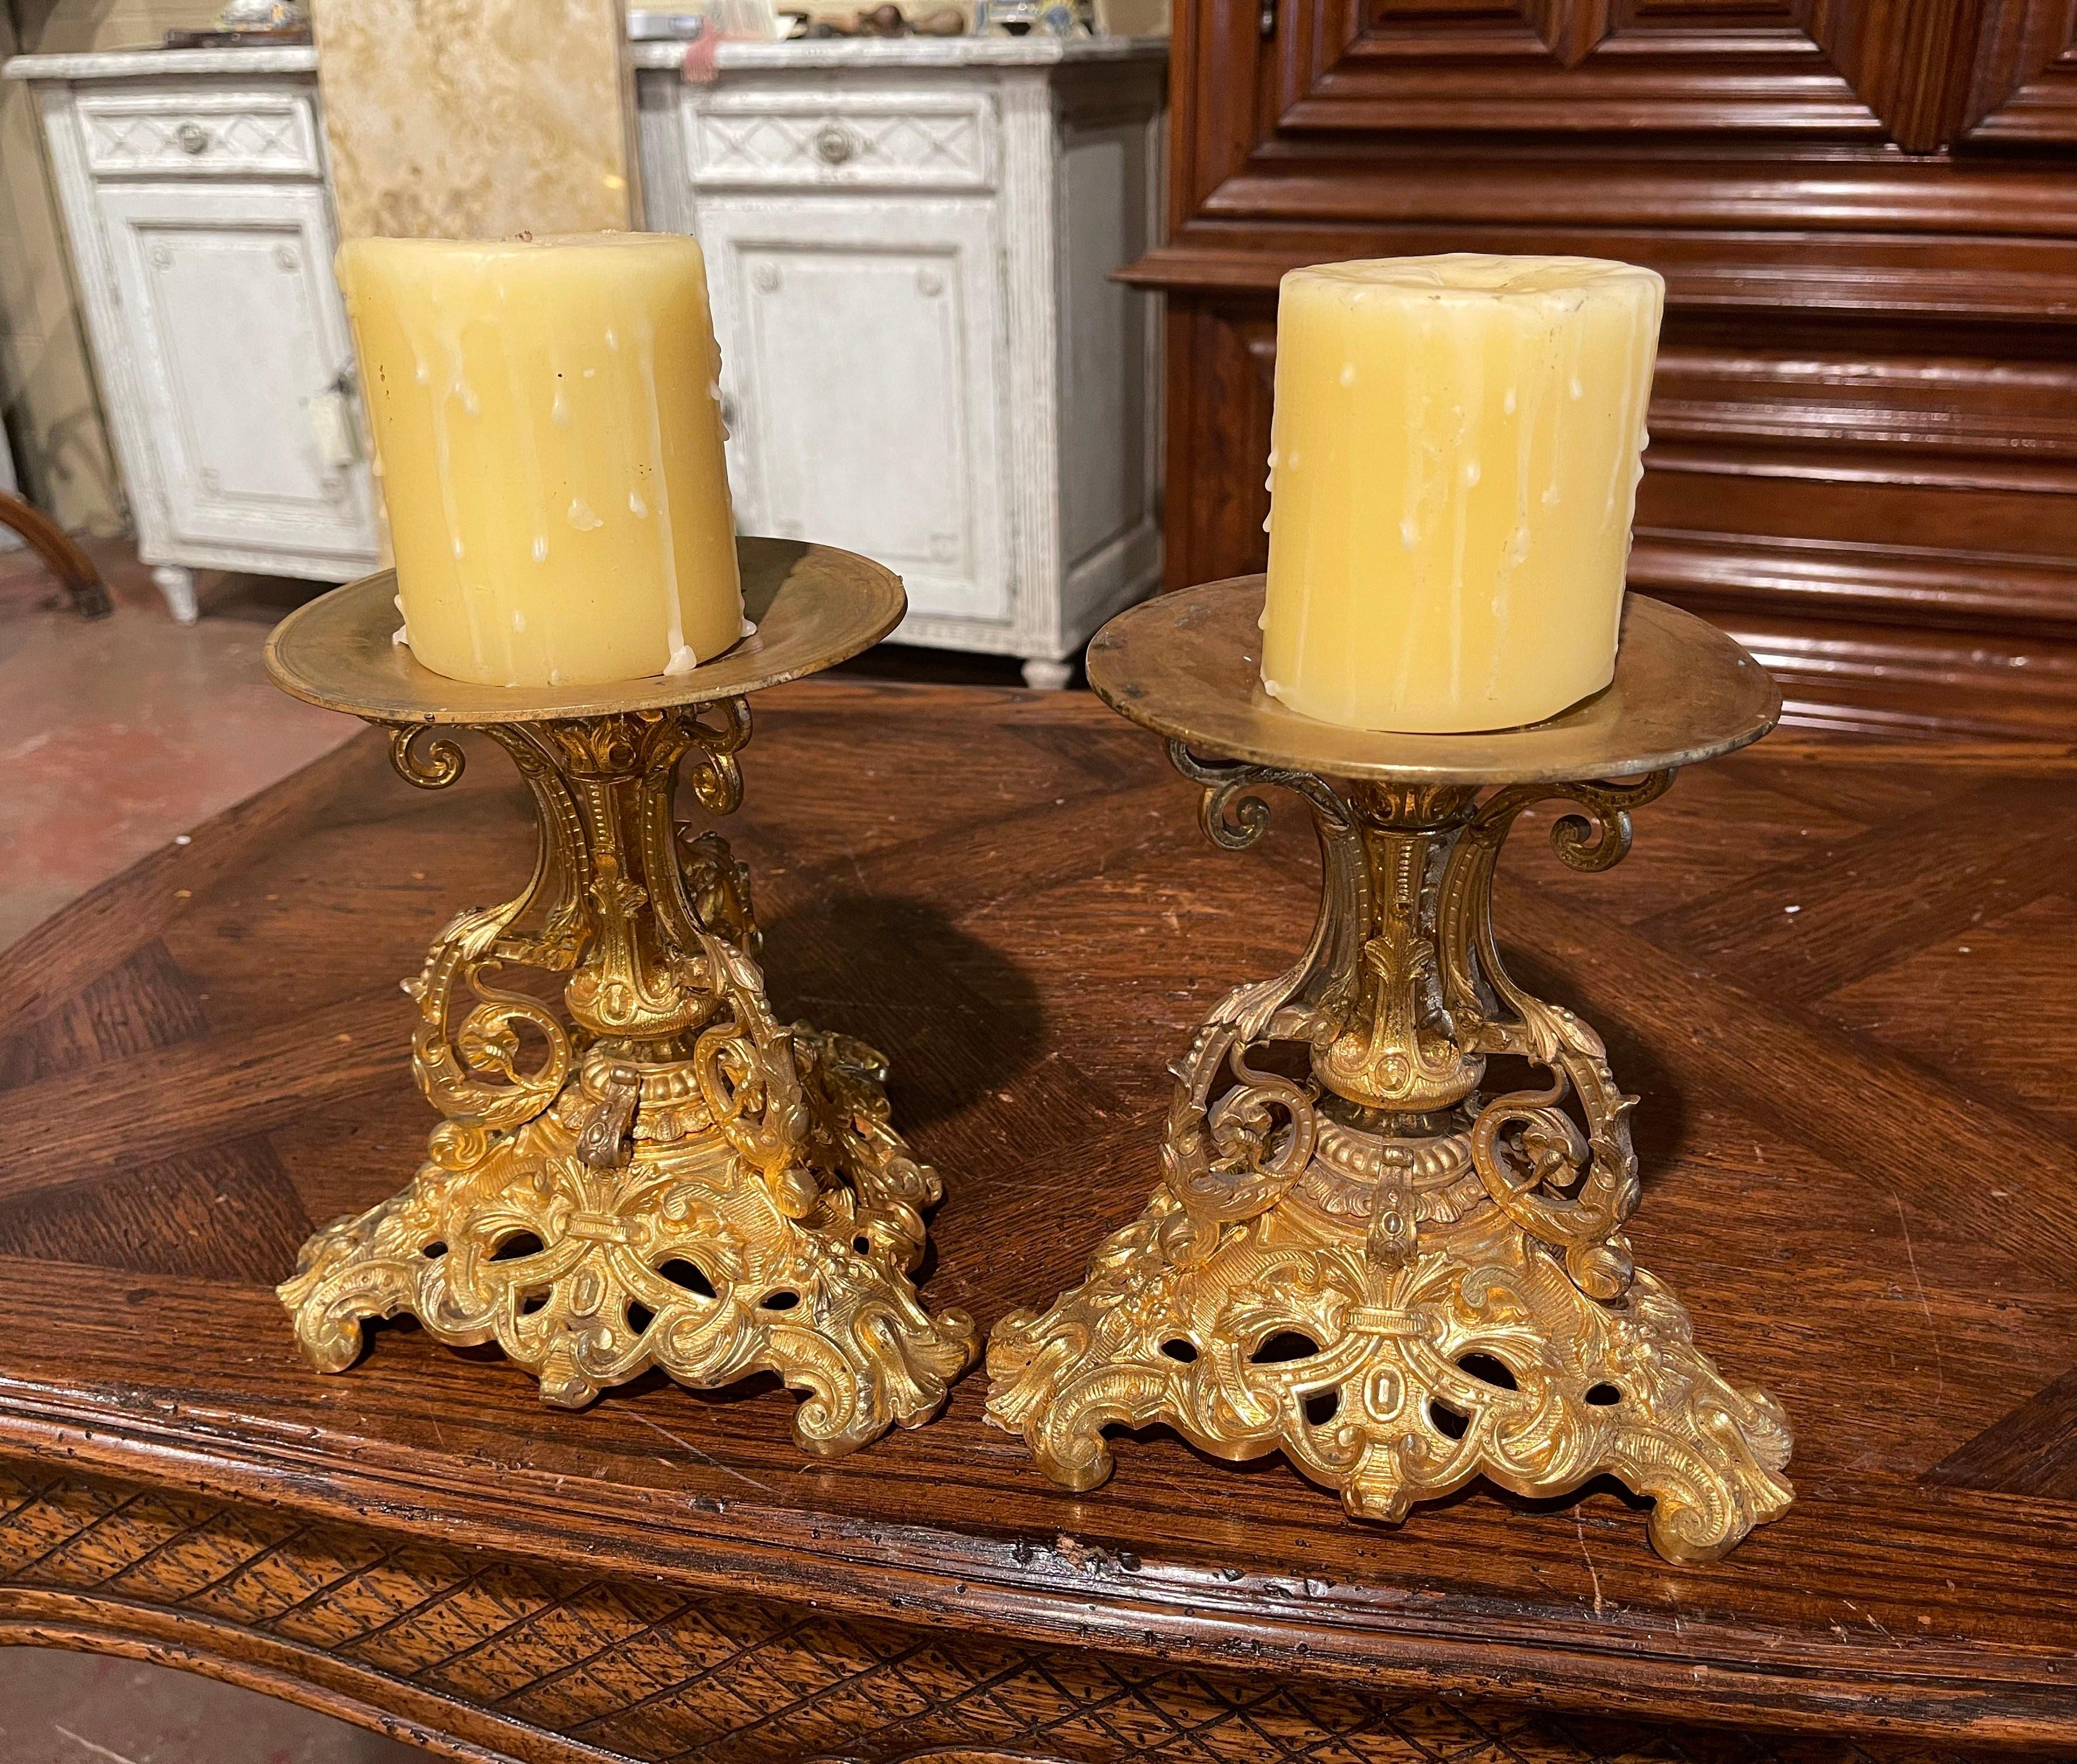 Crafted in France circa 1870, the antique candlesticks stand on a triangular base ending with scrolled feet. Each light is decorated with intricate floral and leaf motifs. The top is dressed with a round bobeche to hold a candle in place. The